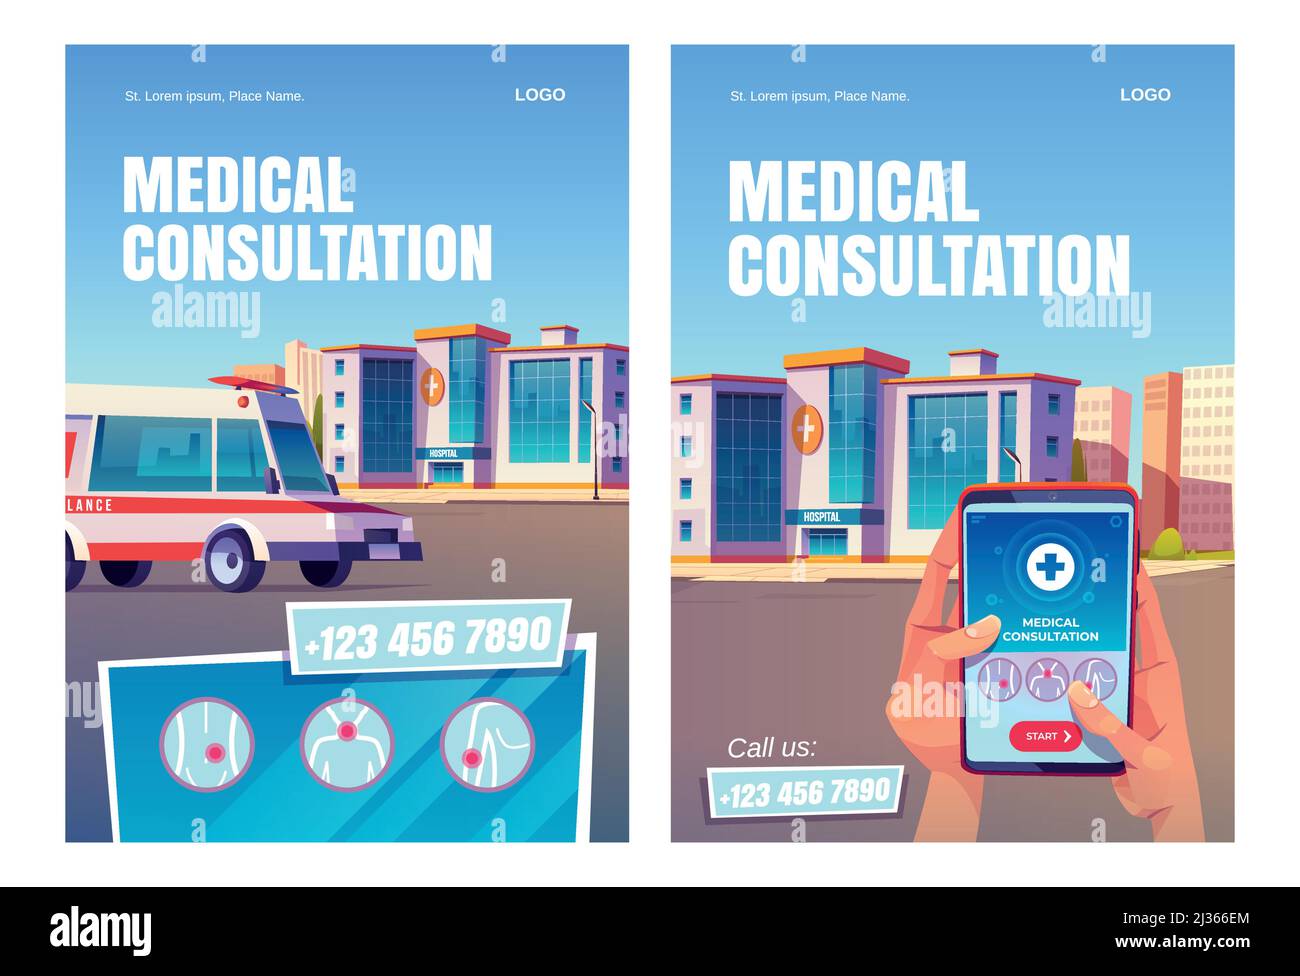 Online medical consultation app cartoon posters. Hands hold smartphone with application interface on hospital building background with ambulance on ci Stock Vector